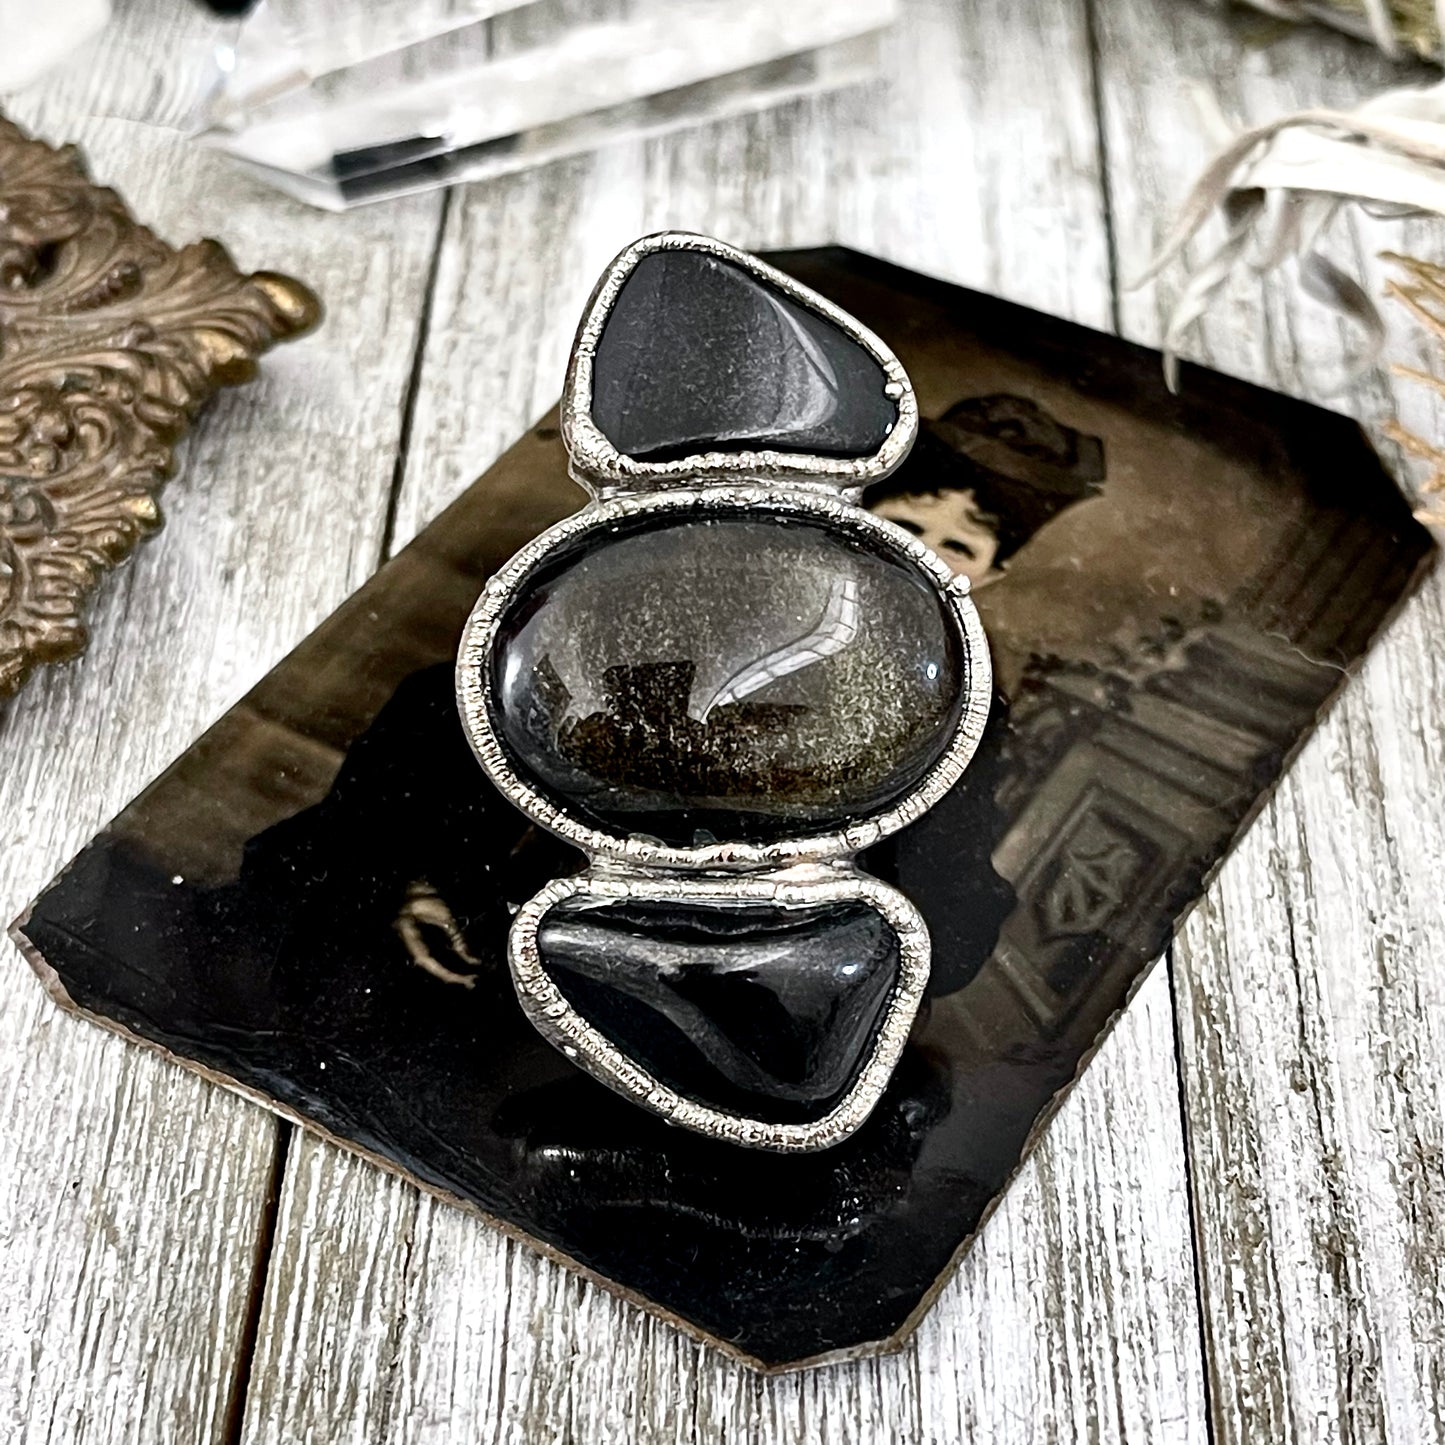 Size 10 Crystal Ring - Three Stone Ring Black Onyx & Silver Sheen Obsidian Silver Ring / Foxlark Collection - One of a Kind